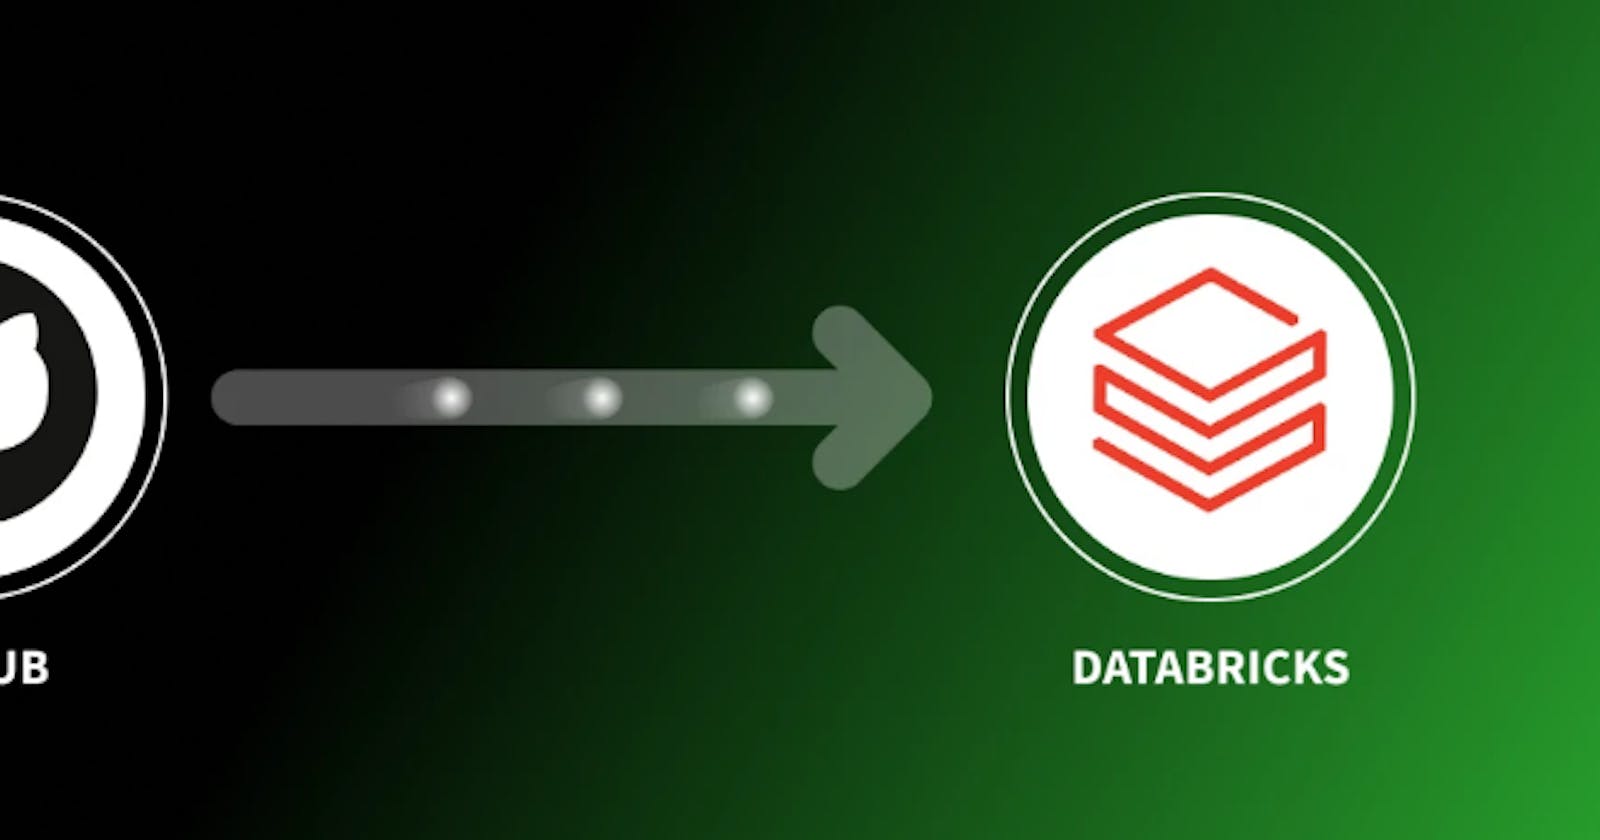 How to integrate GIT with Databricks